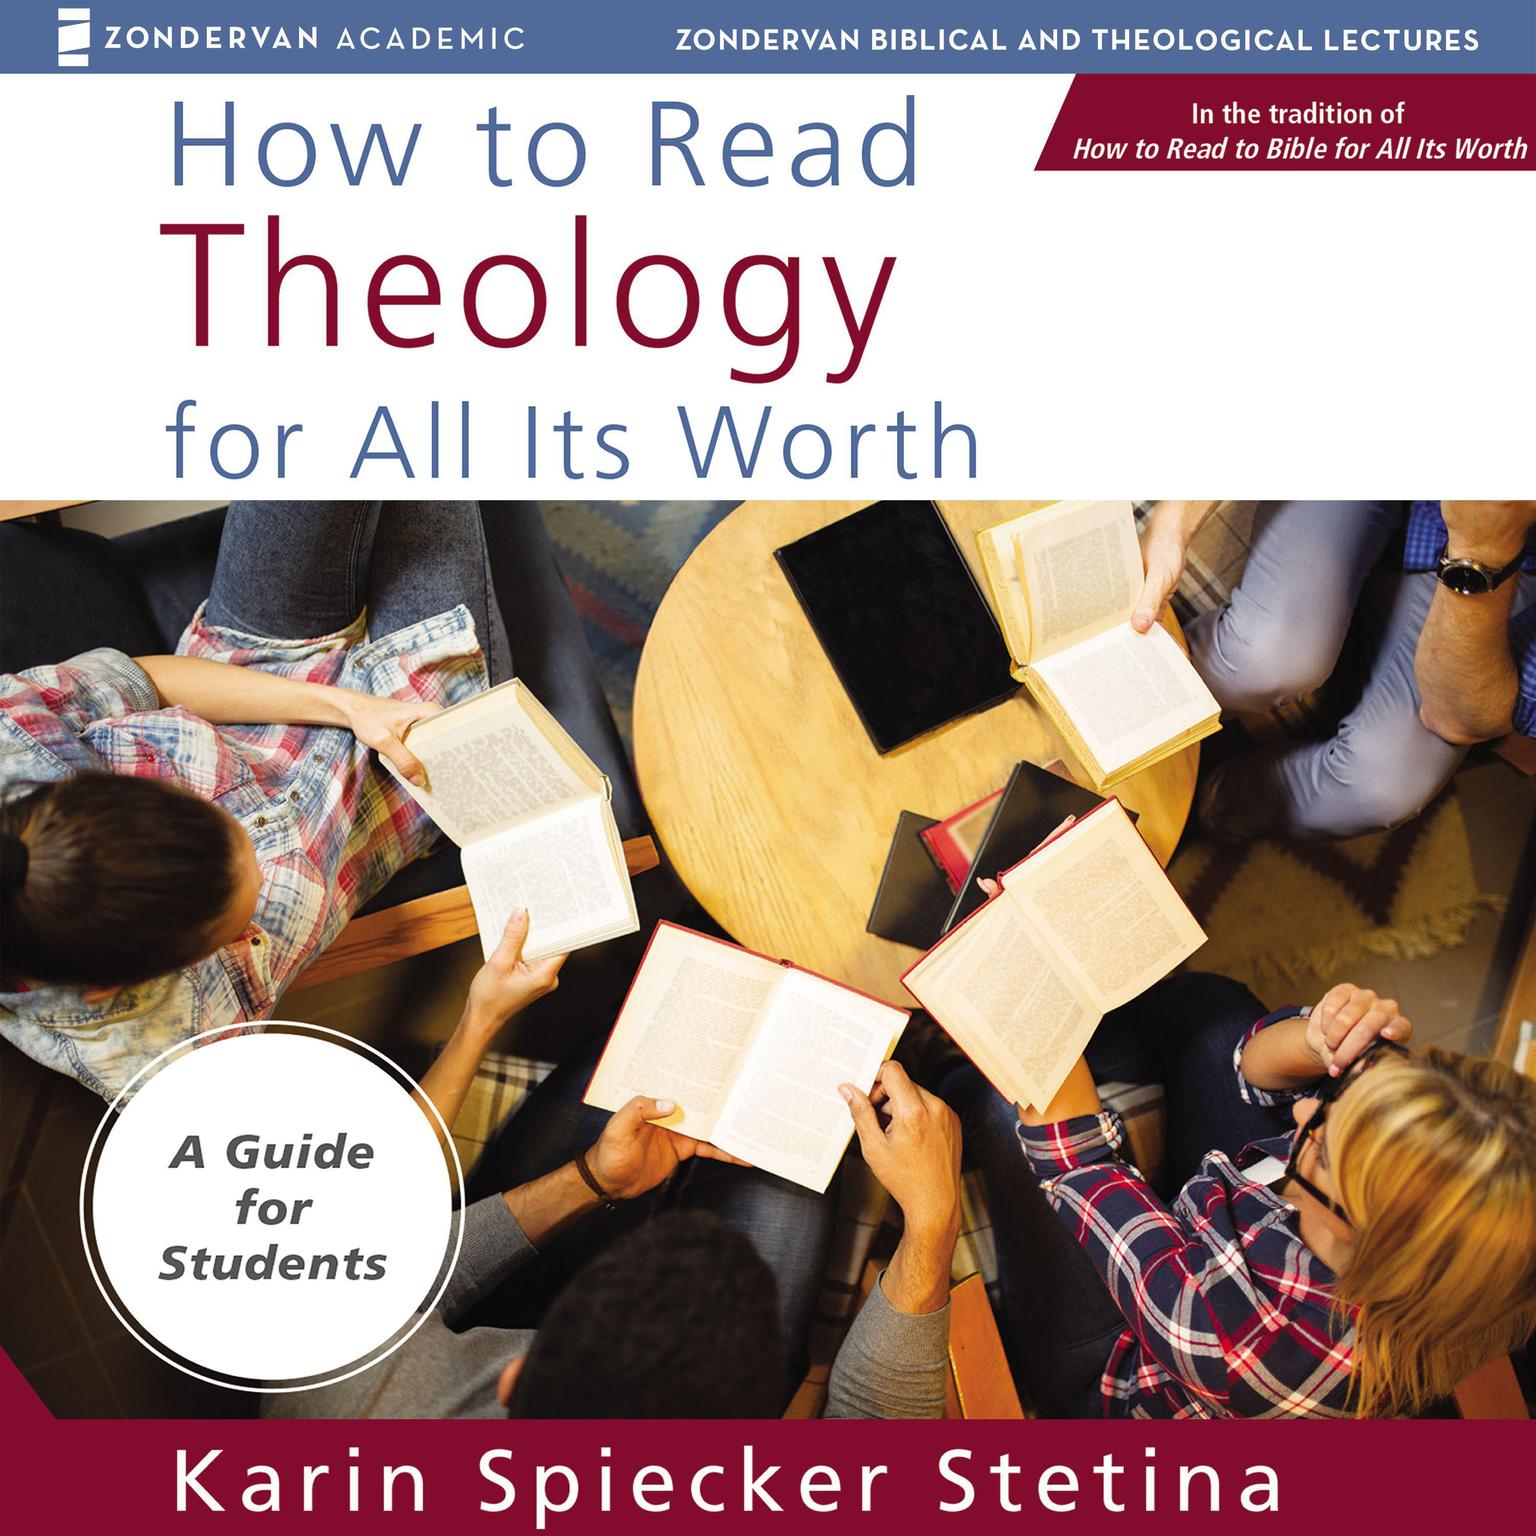 How to Read Theology for All Its Worth: Audio Lectures: An Introduction for the Beginner Audiobook, by Karin Spiecker Stetina